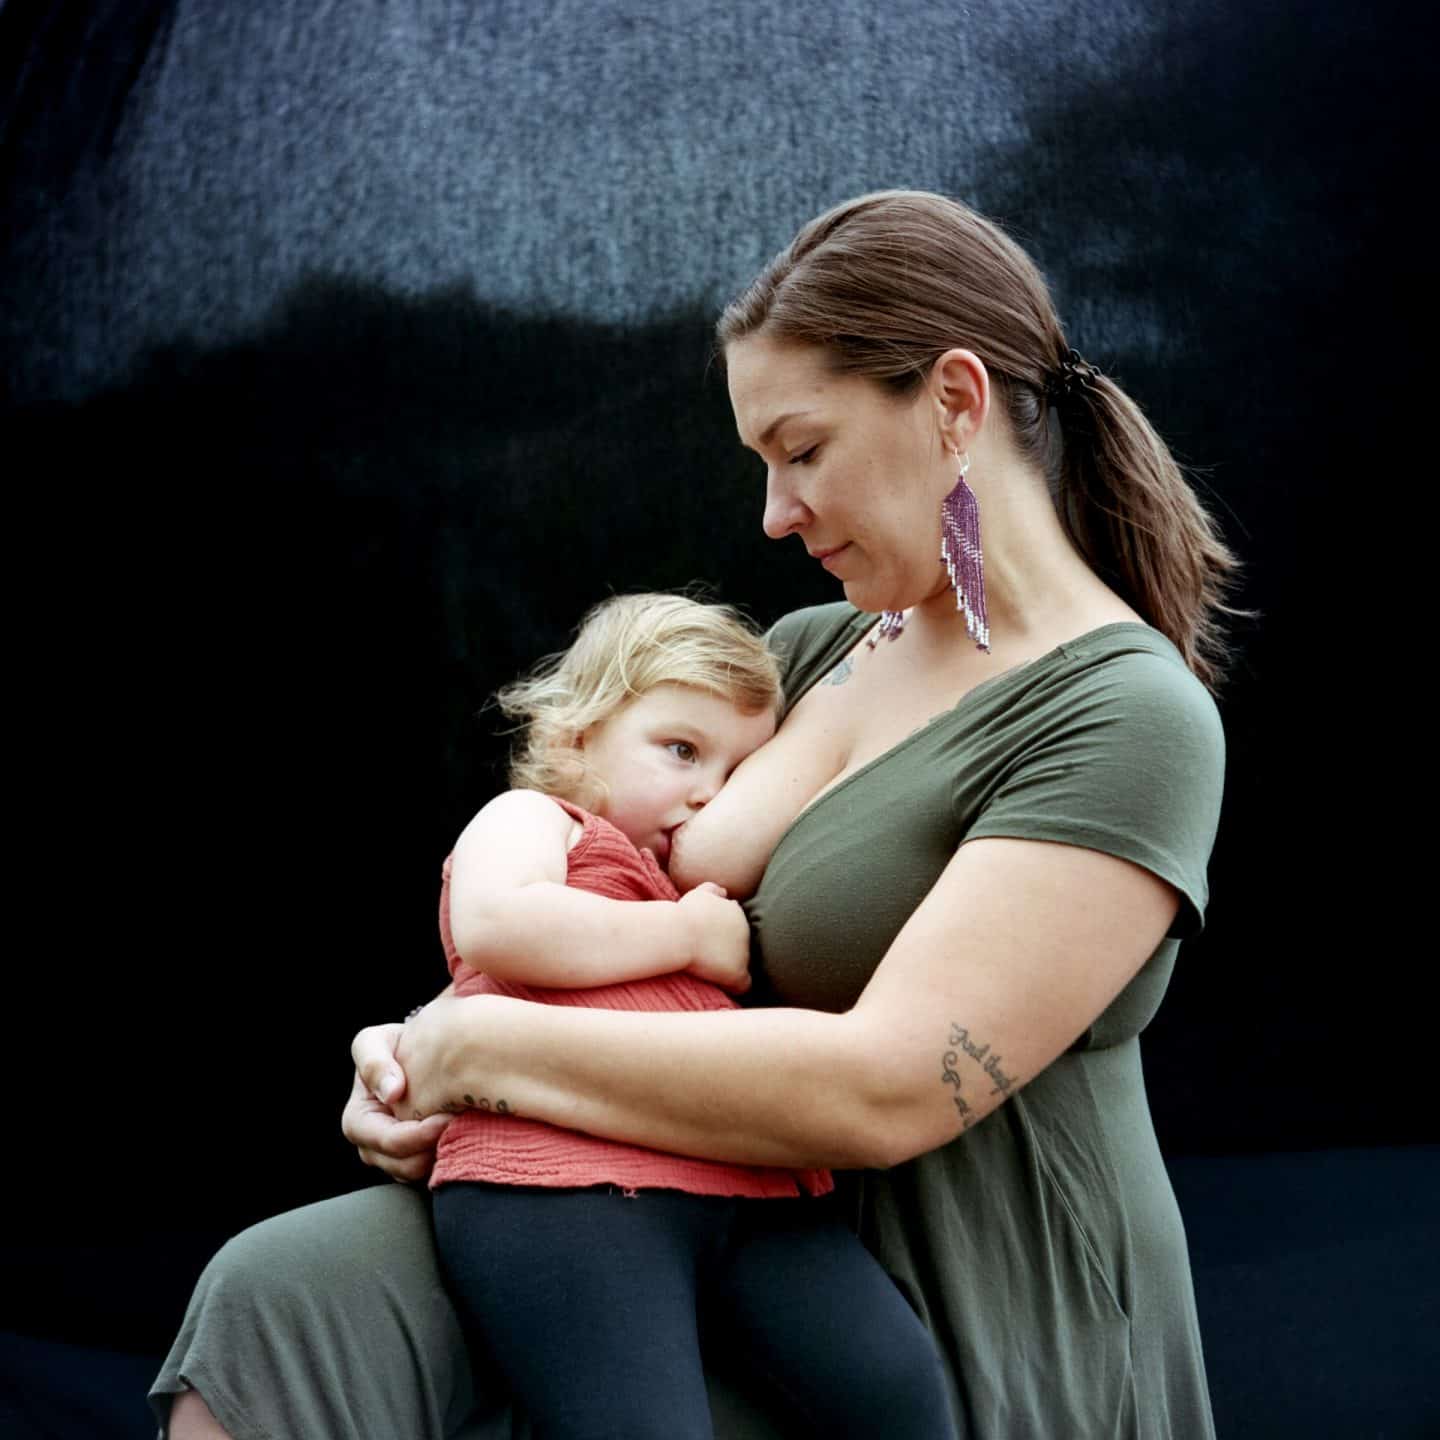 Shelby Lisk, Sarah and Willow, 2021, colour photograph mounted on dibond. Collection of the artist